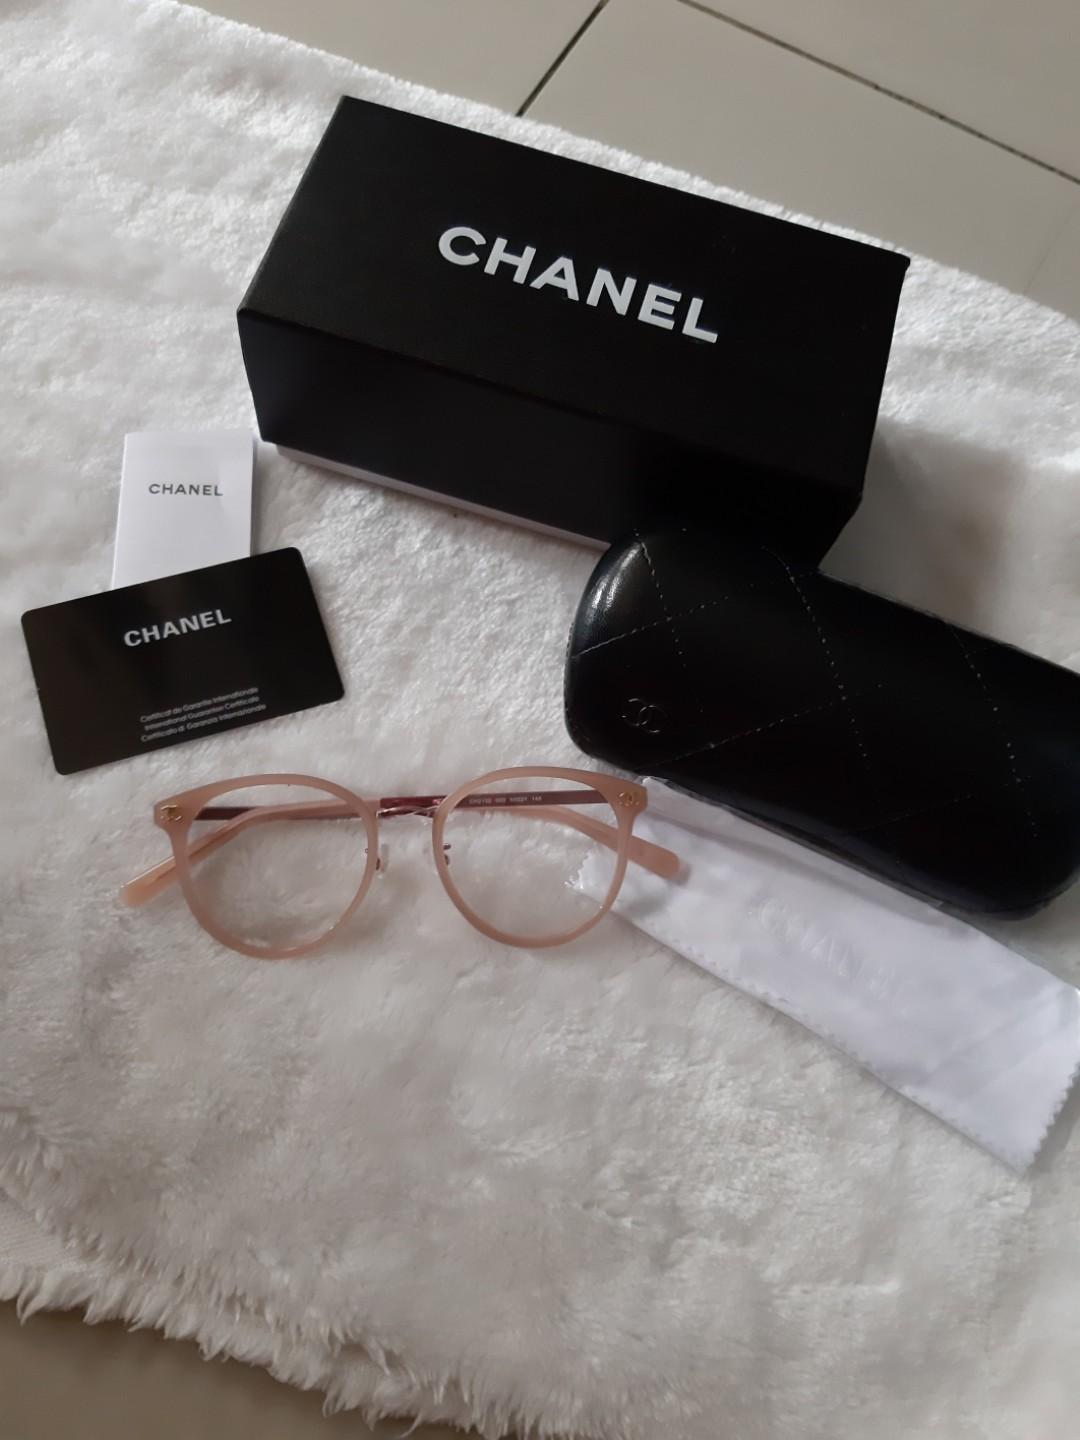 CHANEL Rectangular Sunglasses CH5442 PinkBrown Gradient at John Lewis   Partners